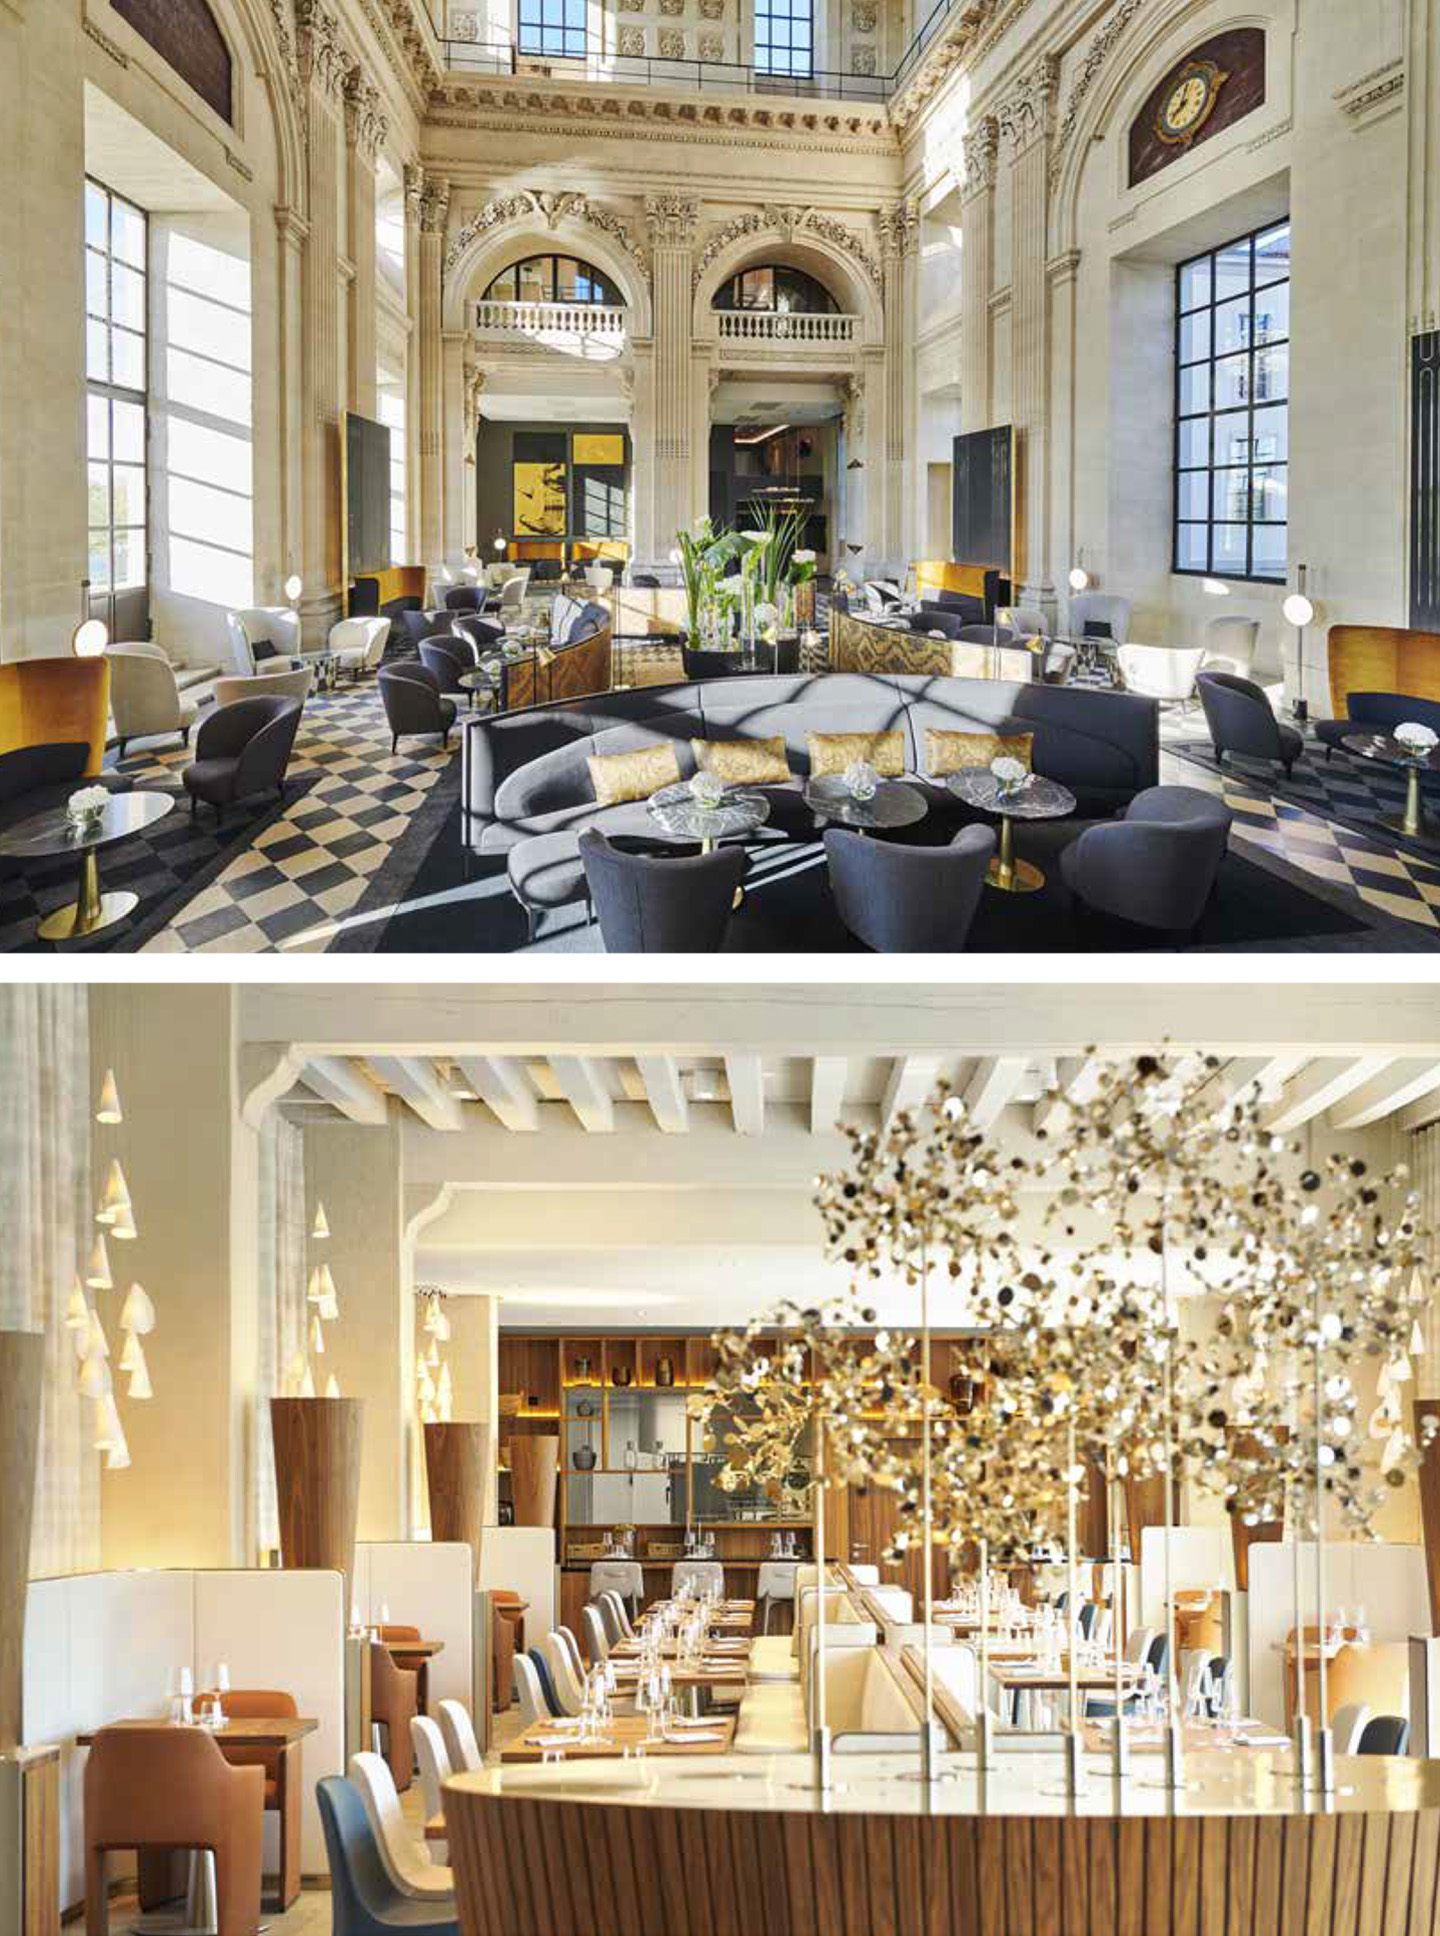 Article on the InterContinental Lyon Hotel Dieu realized by the studio jean-Philippe Nuel in the magazine Archistorm, new luxury hotel, luxury interior design, historical heritage